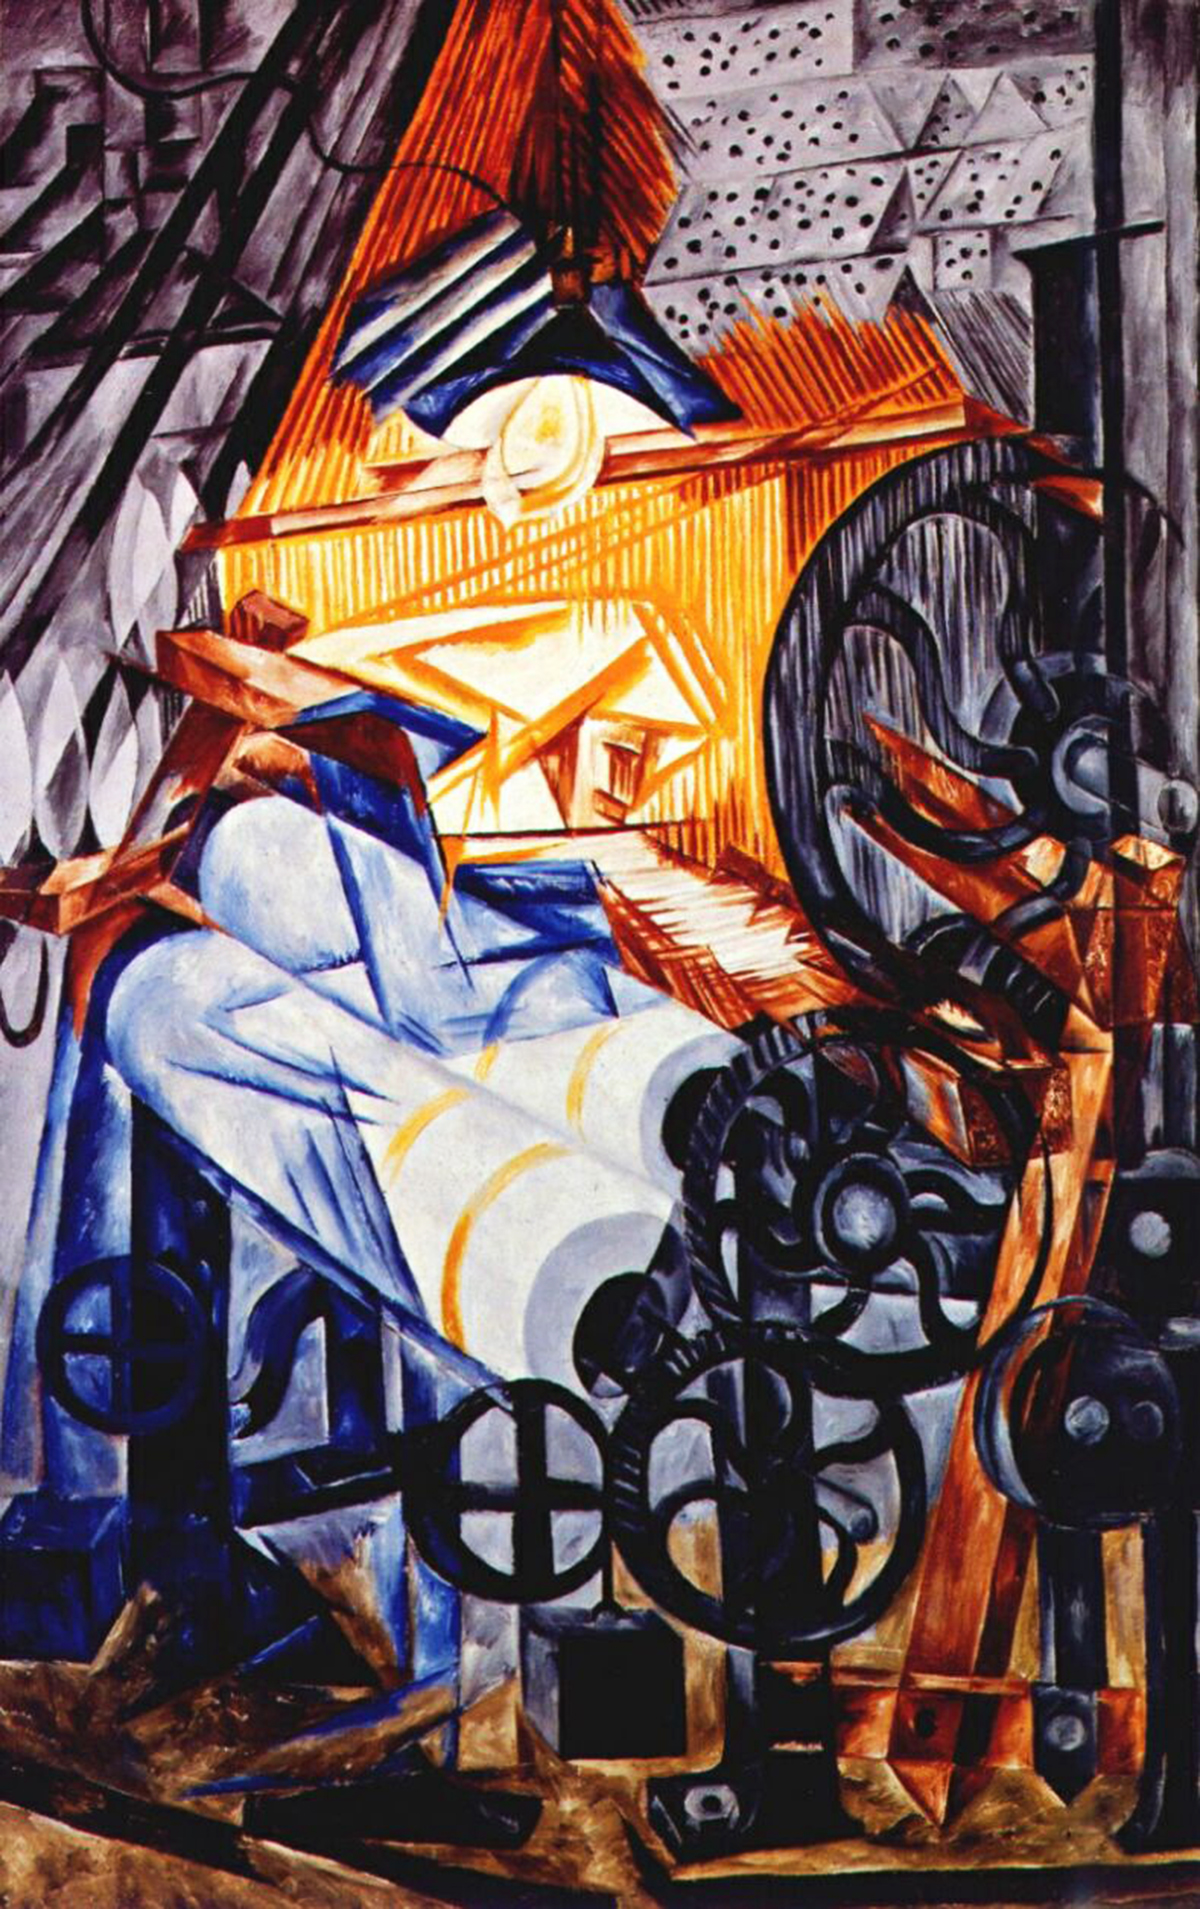 An artwork titled 'The Weaver' by Natalia Goncharova from 1913 showcases the innovative spirit of Futurism. The painting depicts an abstract representation of a weaver at a loom, blending geometric and fragmented forms. Dominated by bold shades of blue, orange, and white, the composition emphasizes the interplay of machinery and human activity. Sharp angles and dynamic shapes convey the rhythmic motion and intensity of the weaving process, capturing the essence of industrial progress and human endeavor.